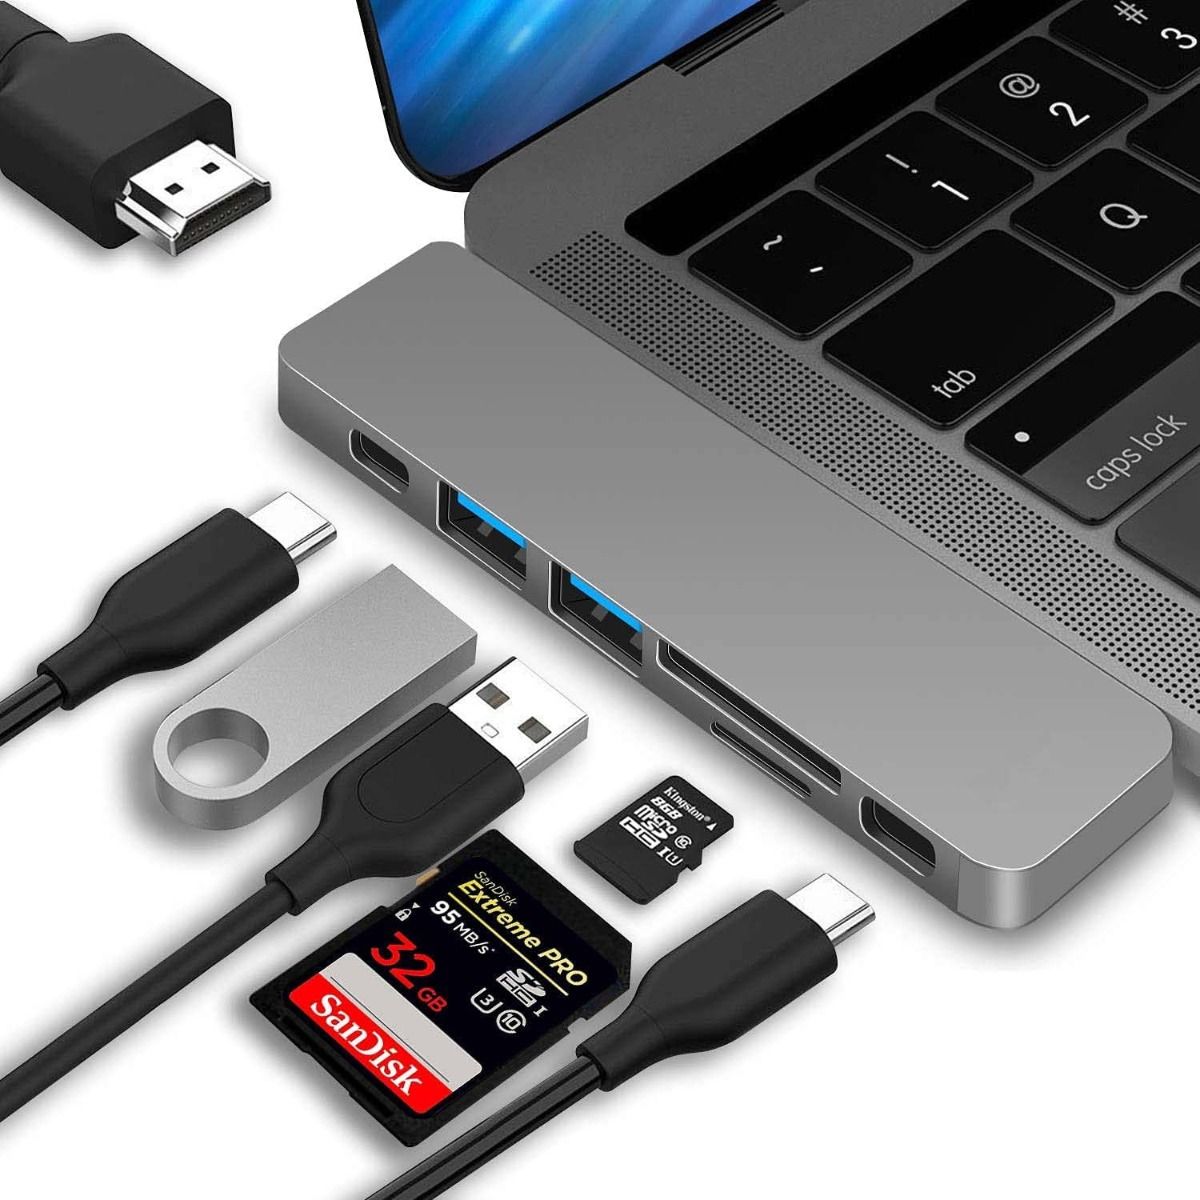 USB C Hub Adapter 7 in 1 Type C Hub for MacBook Pro and USB C to HDMI, Thunderbolt 3 & TF/SD Card Reader, 100W USB-C Power Delivery, 2 USB 3.0 Ports